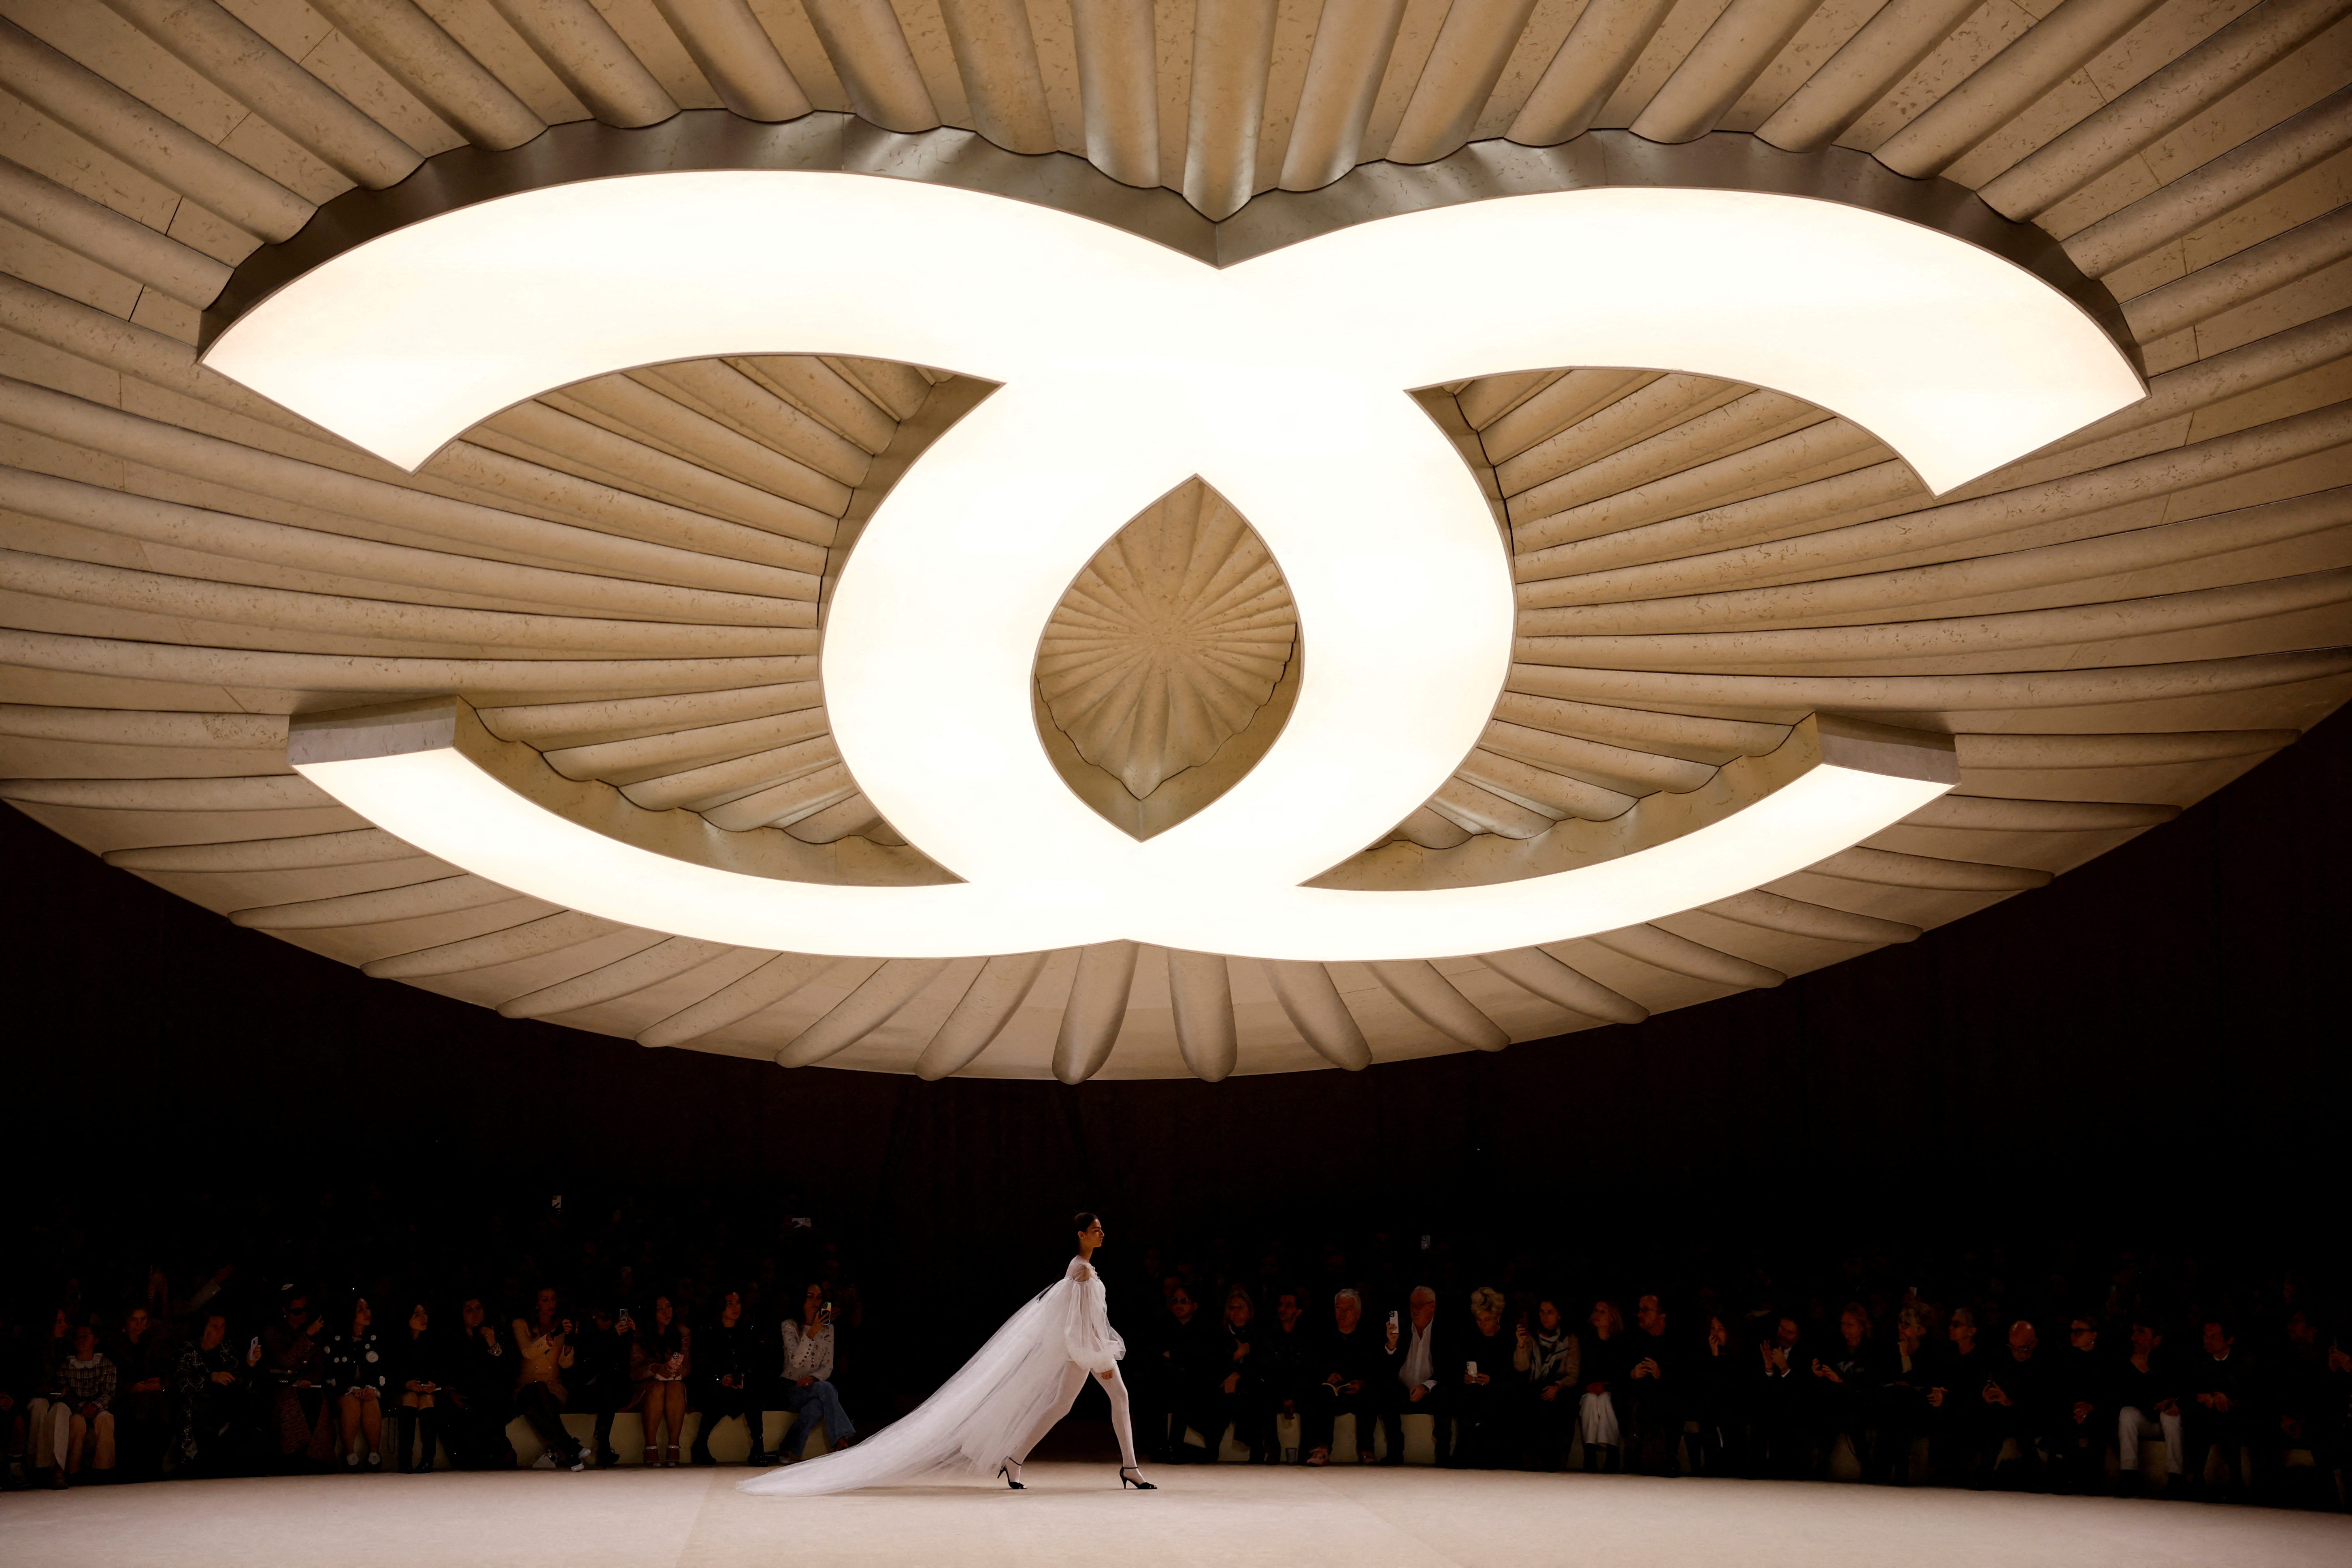 Virginie Viard hits all the light notes for Chanel's haute couture outing